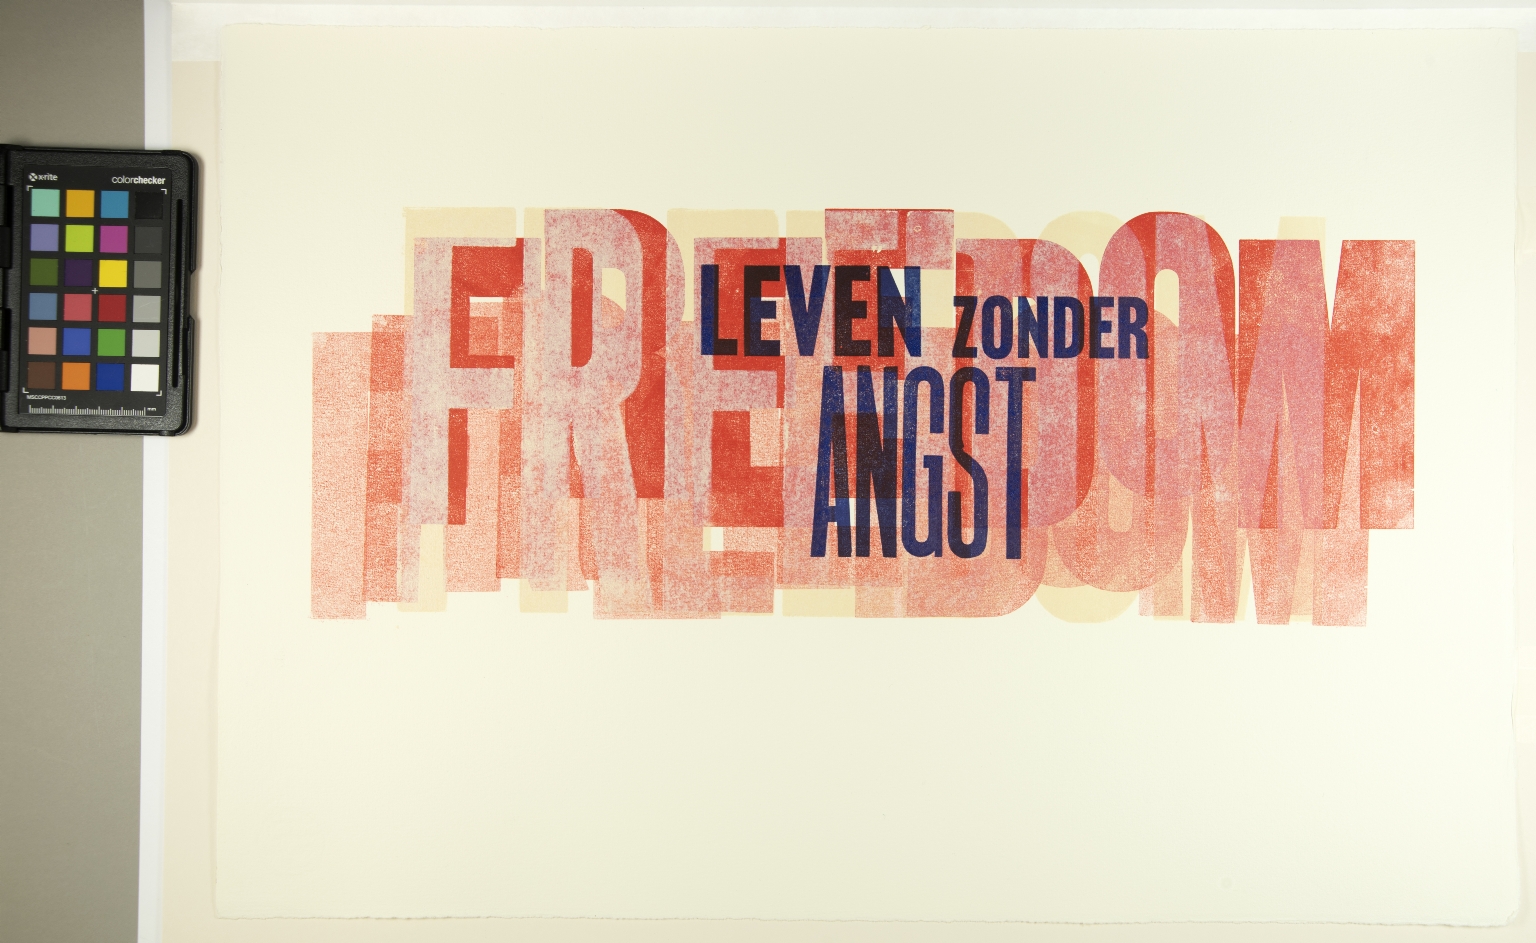 "Leven wonder angst," Freedom from fear